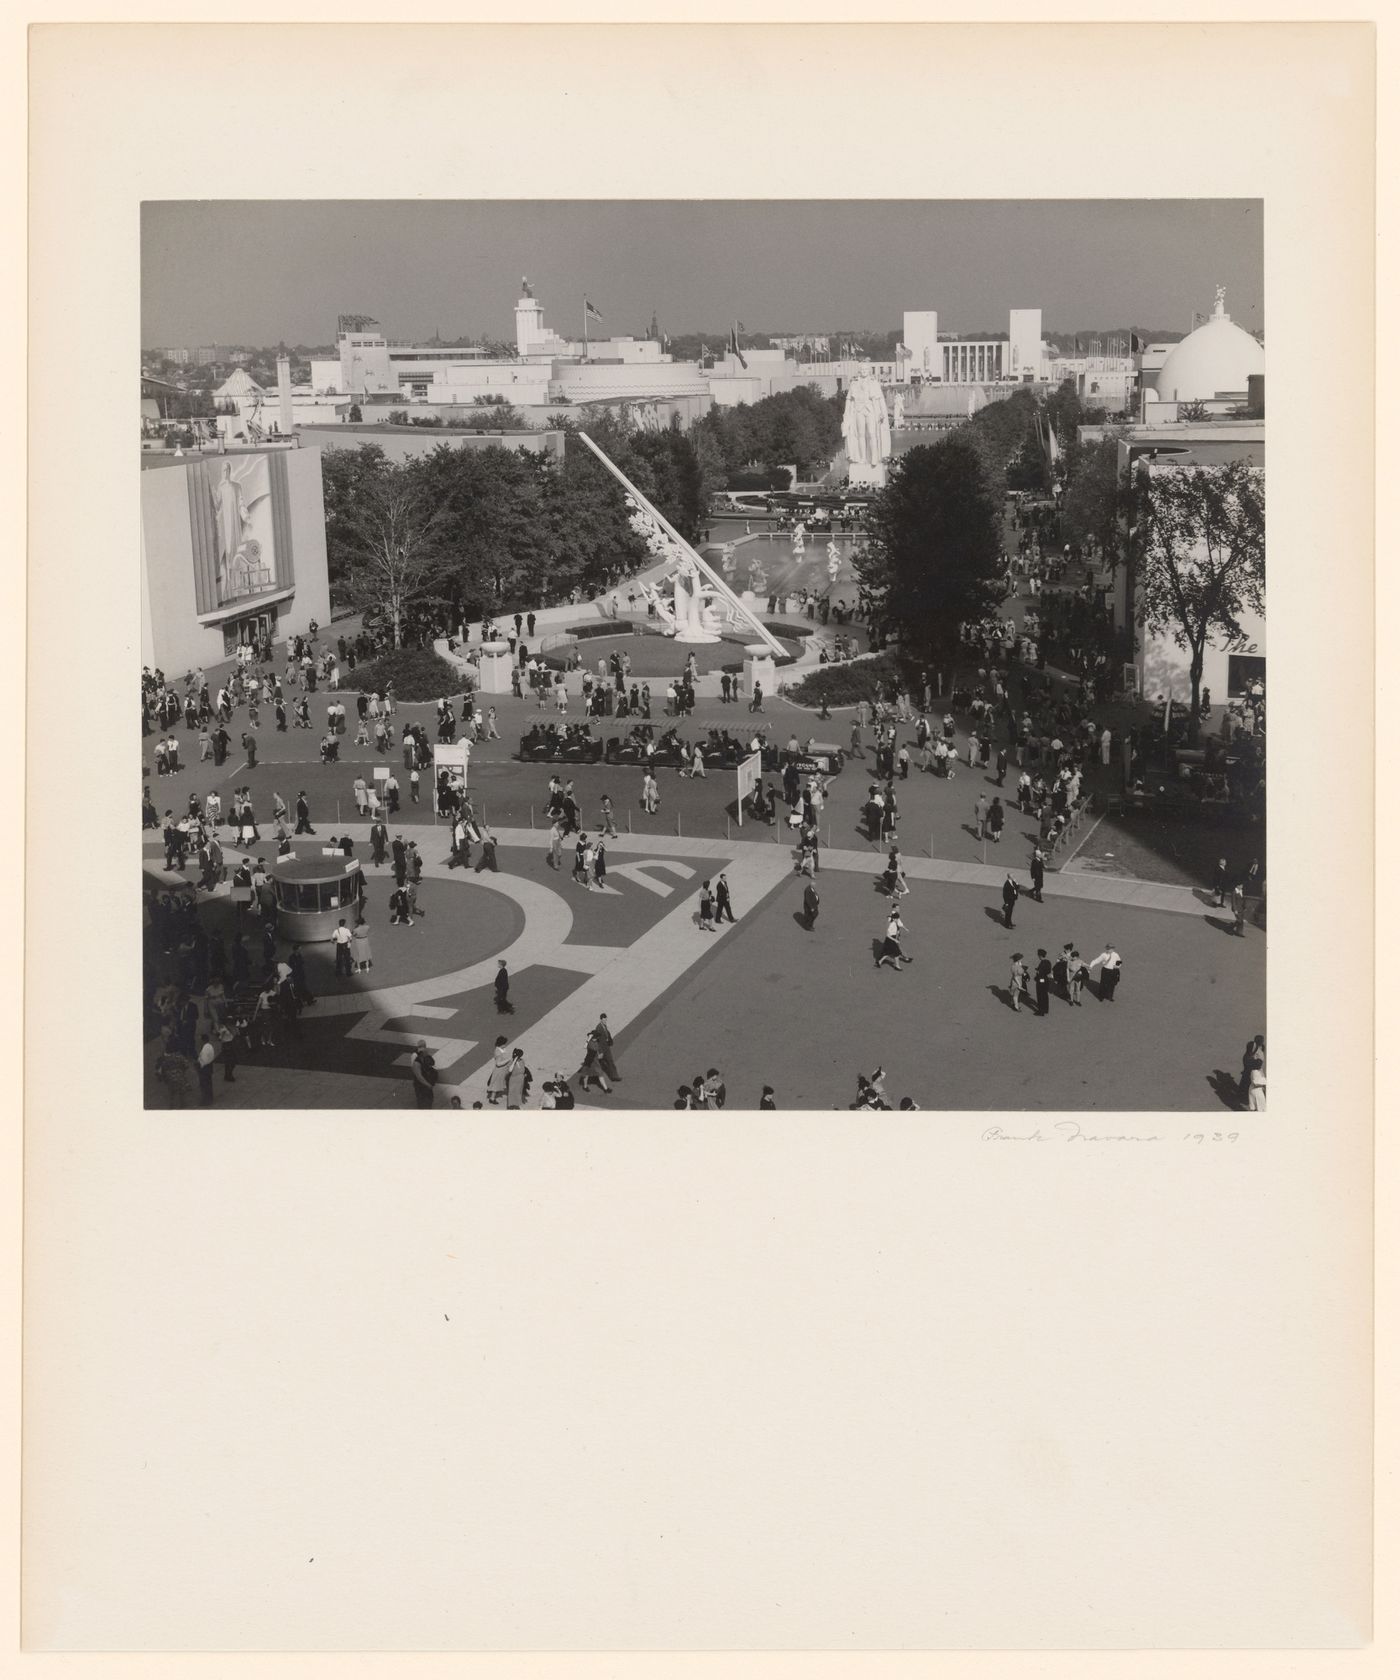 New York World's Fair (1939-1940): Overview of Mall, Sculptural Sundial in center of picture